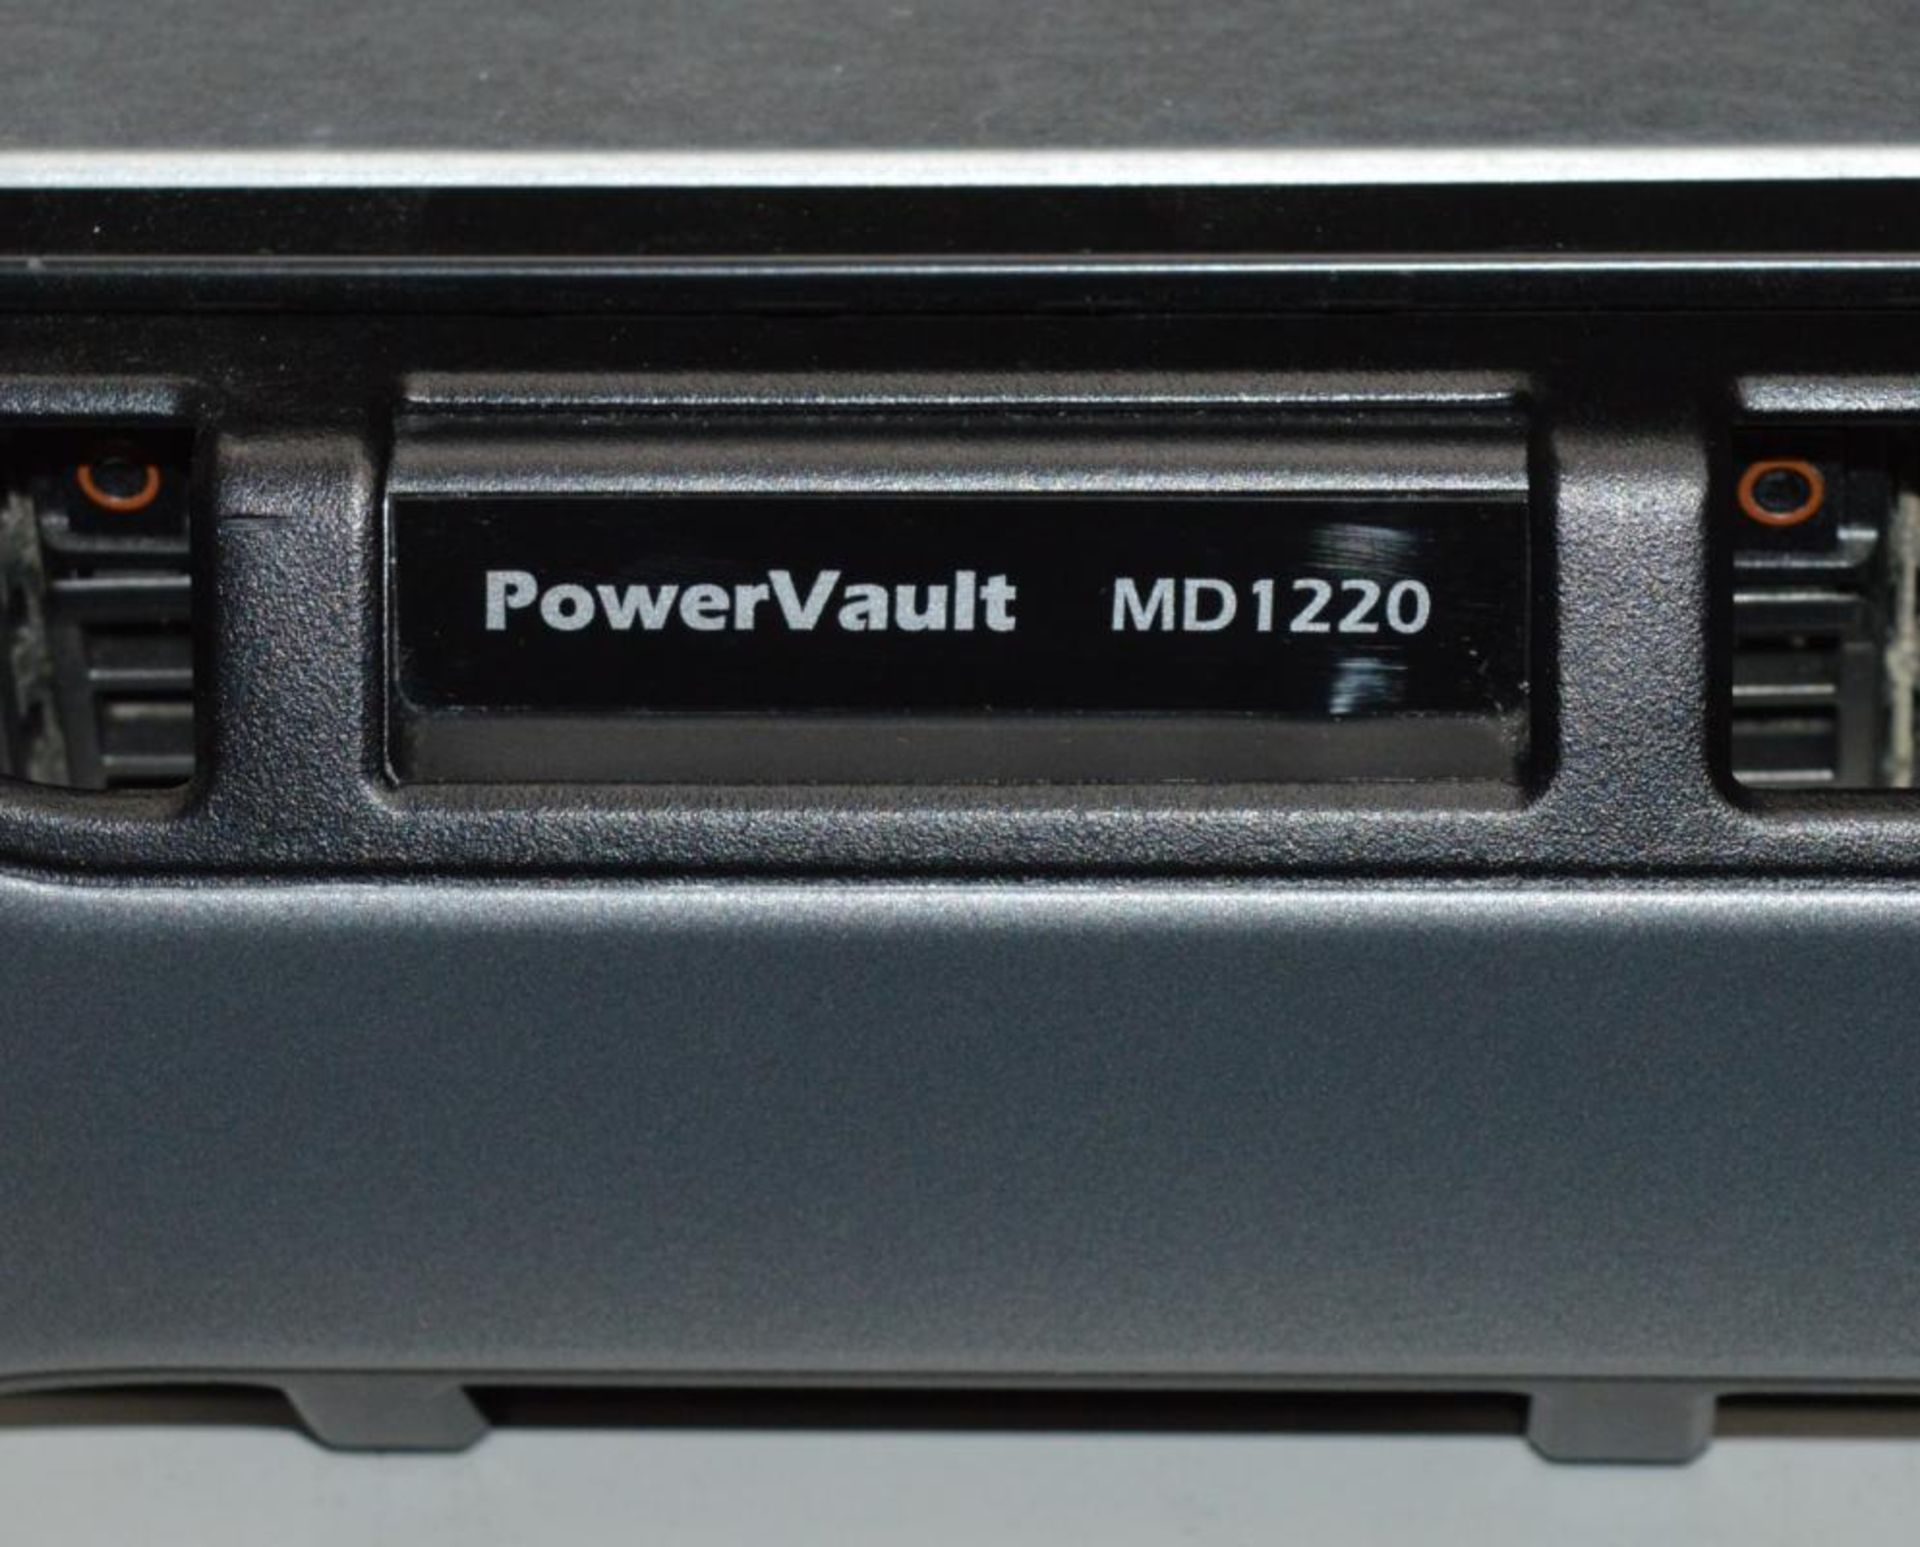 1 x Dell PowerVault MD1220 With Daul 600w PSU's and 2 x MD12 6Gb SAS Controllers - Image 3 of 8